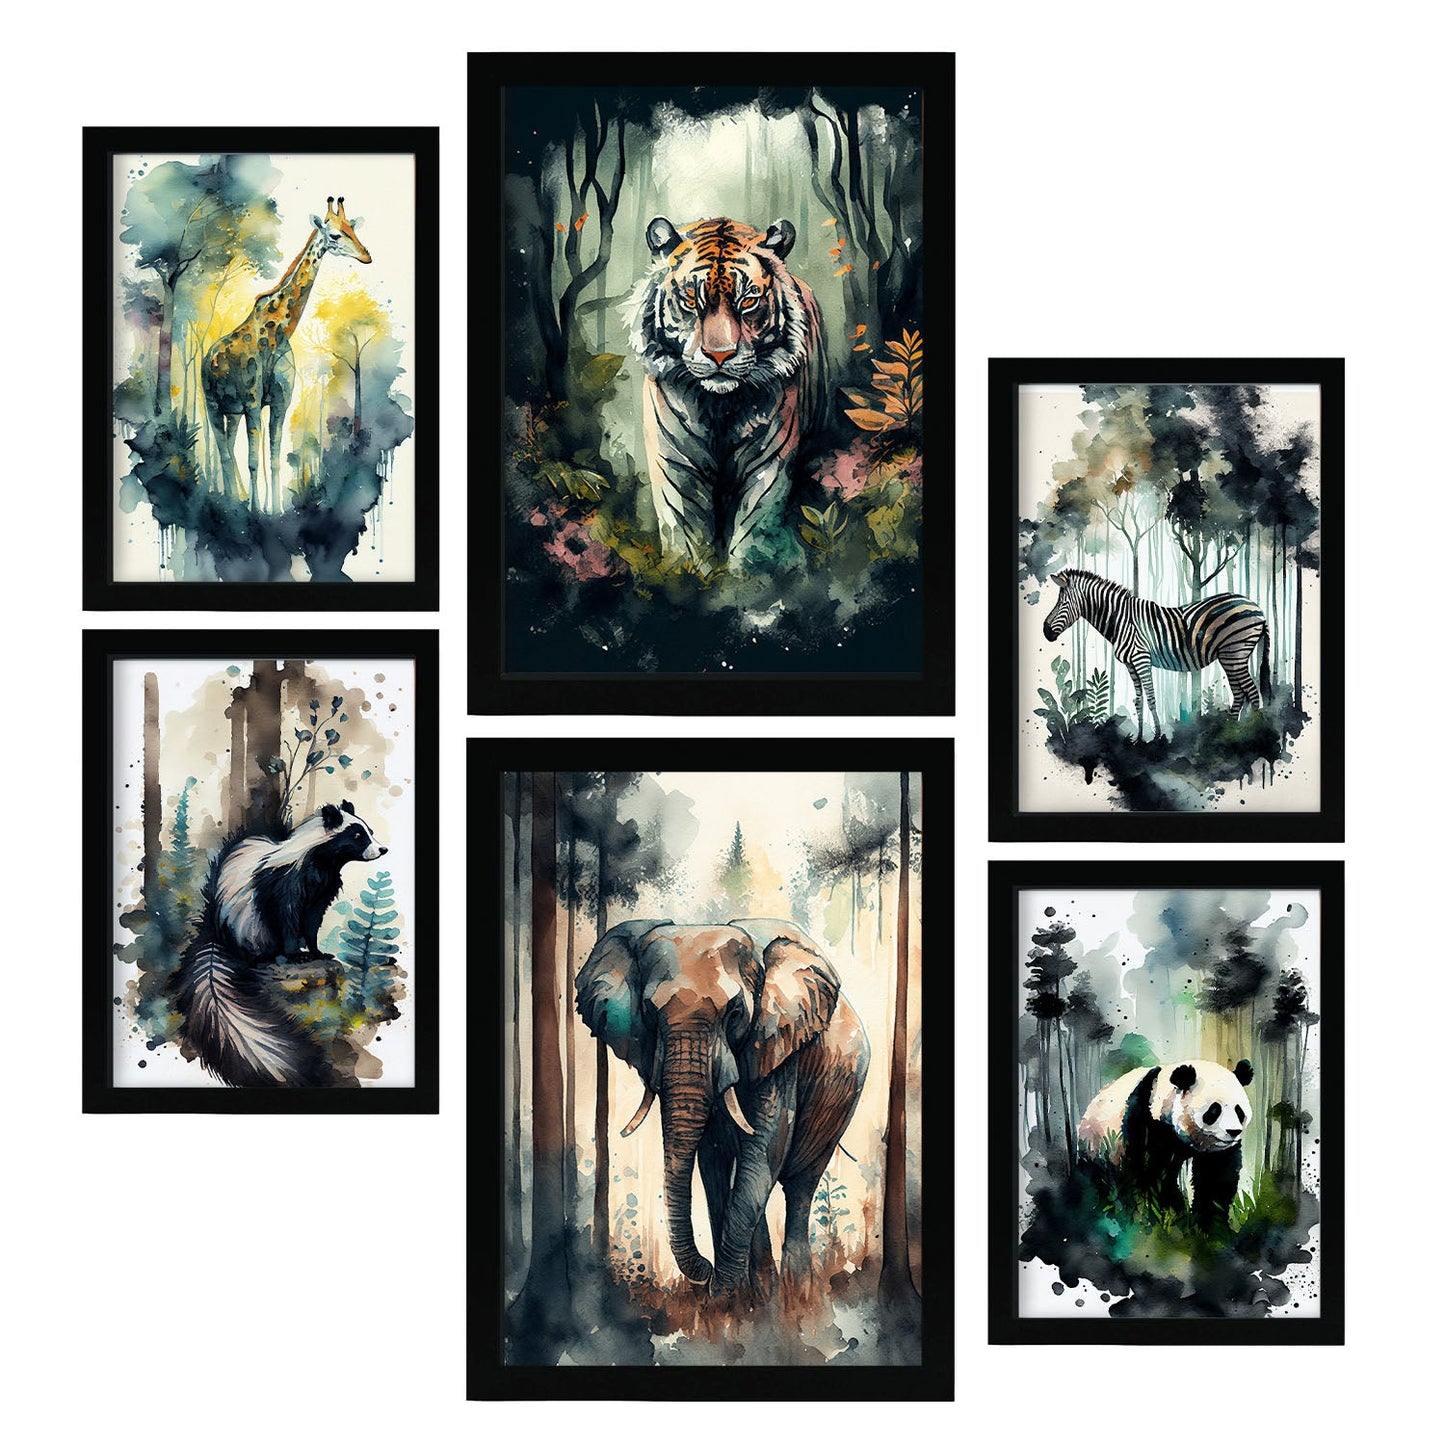 Nacnic Watercolor Animal Set_8. Aesthetic Wall Art Prints for Bedroom or Living Room Design.